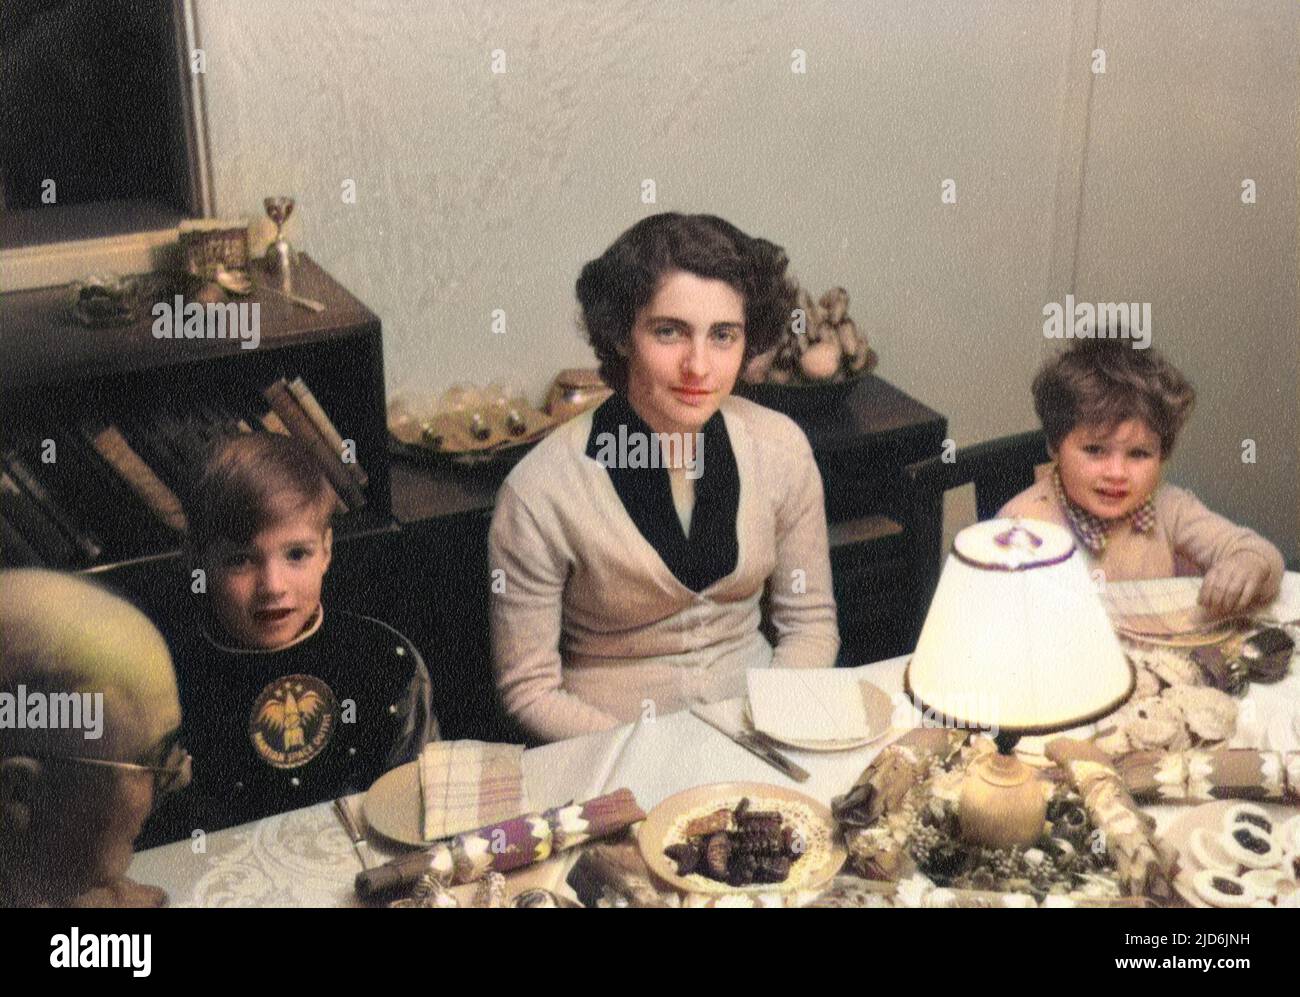 Family Christmas Dinner - 1950s. The young boy (front left) is wearing his Christmas present - a 'Martian Space Outfit'. Colourised version of: 10794434       Date: early 1950s Stock Photo